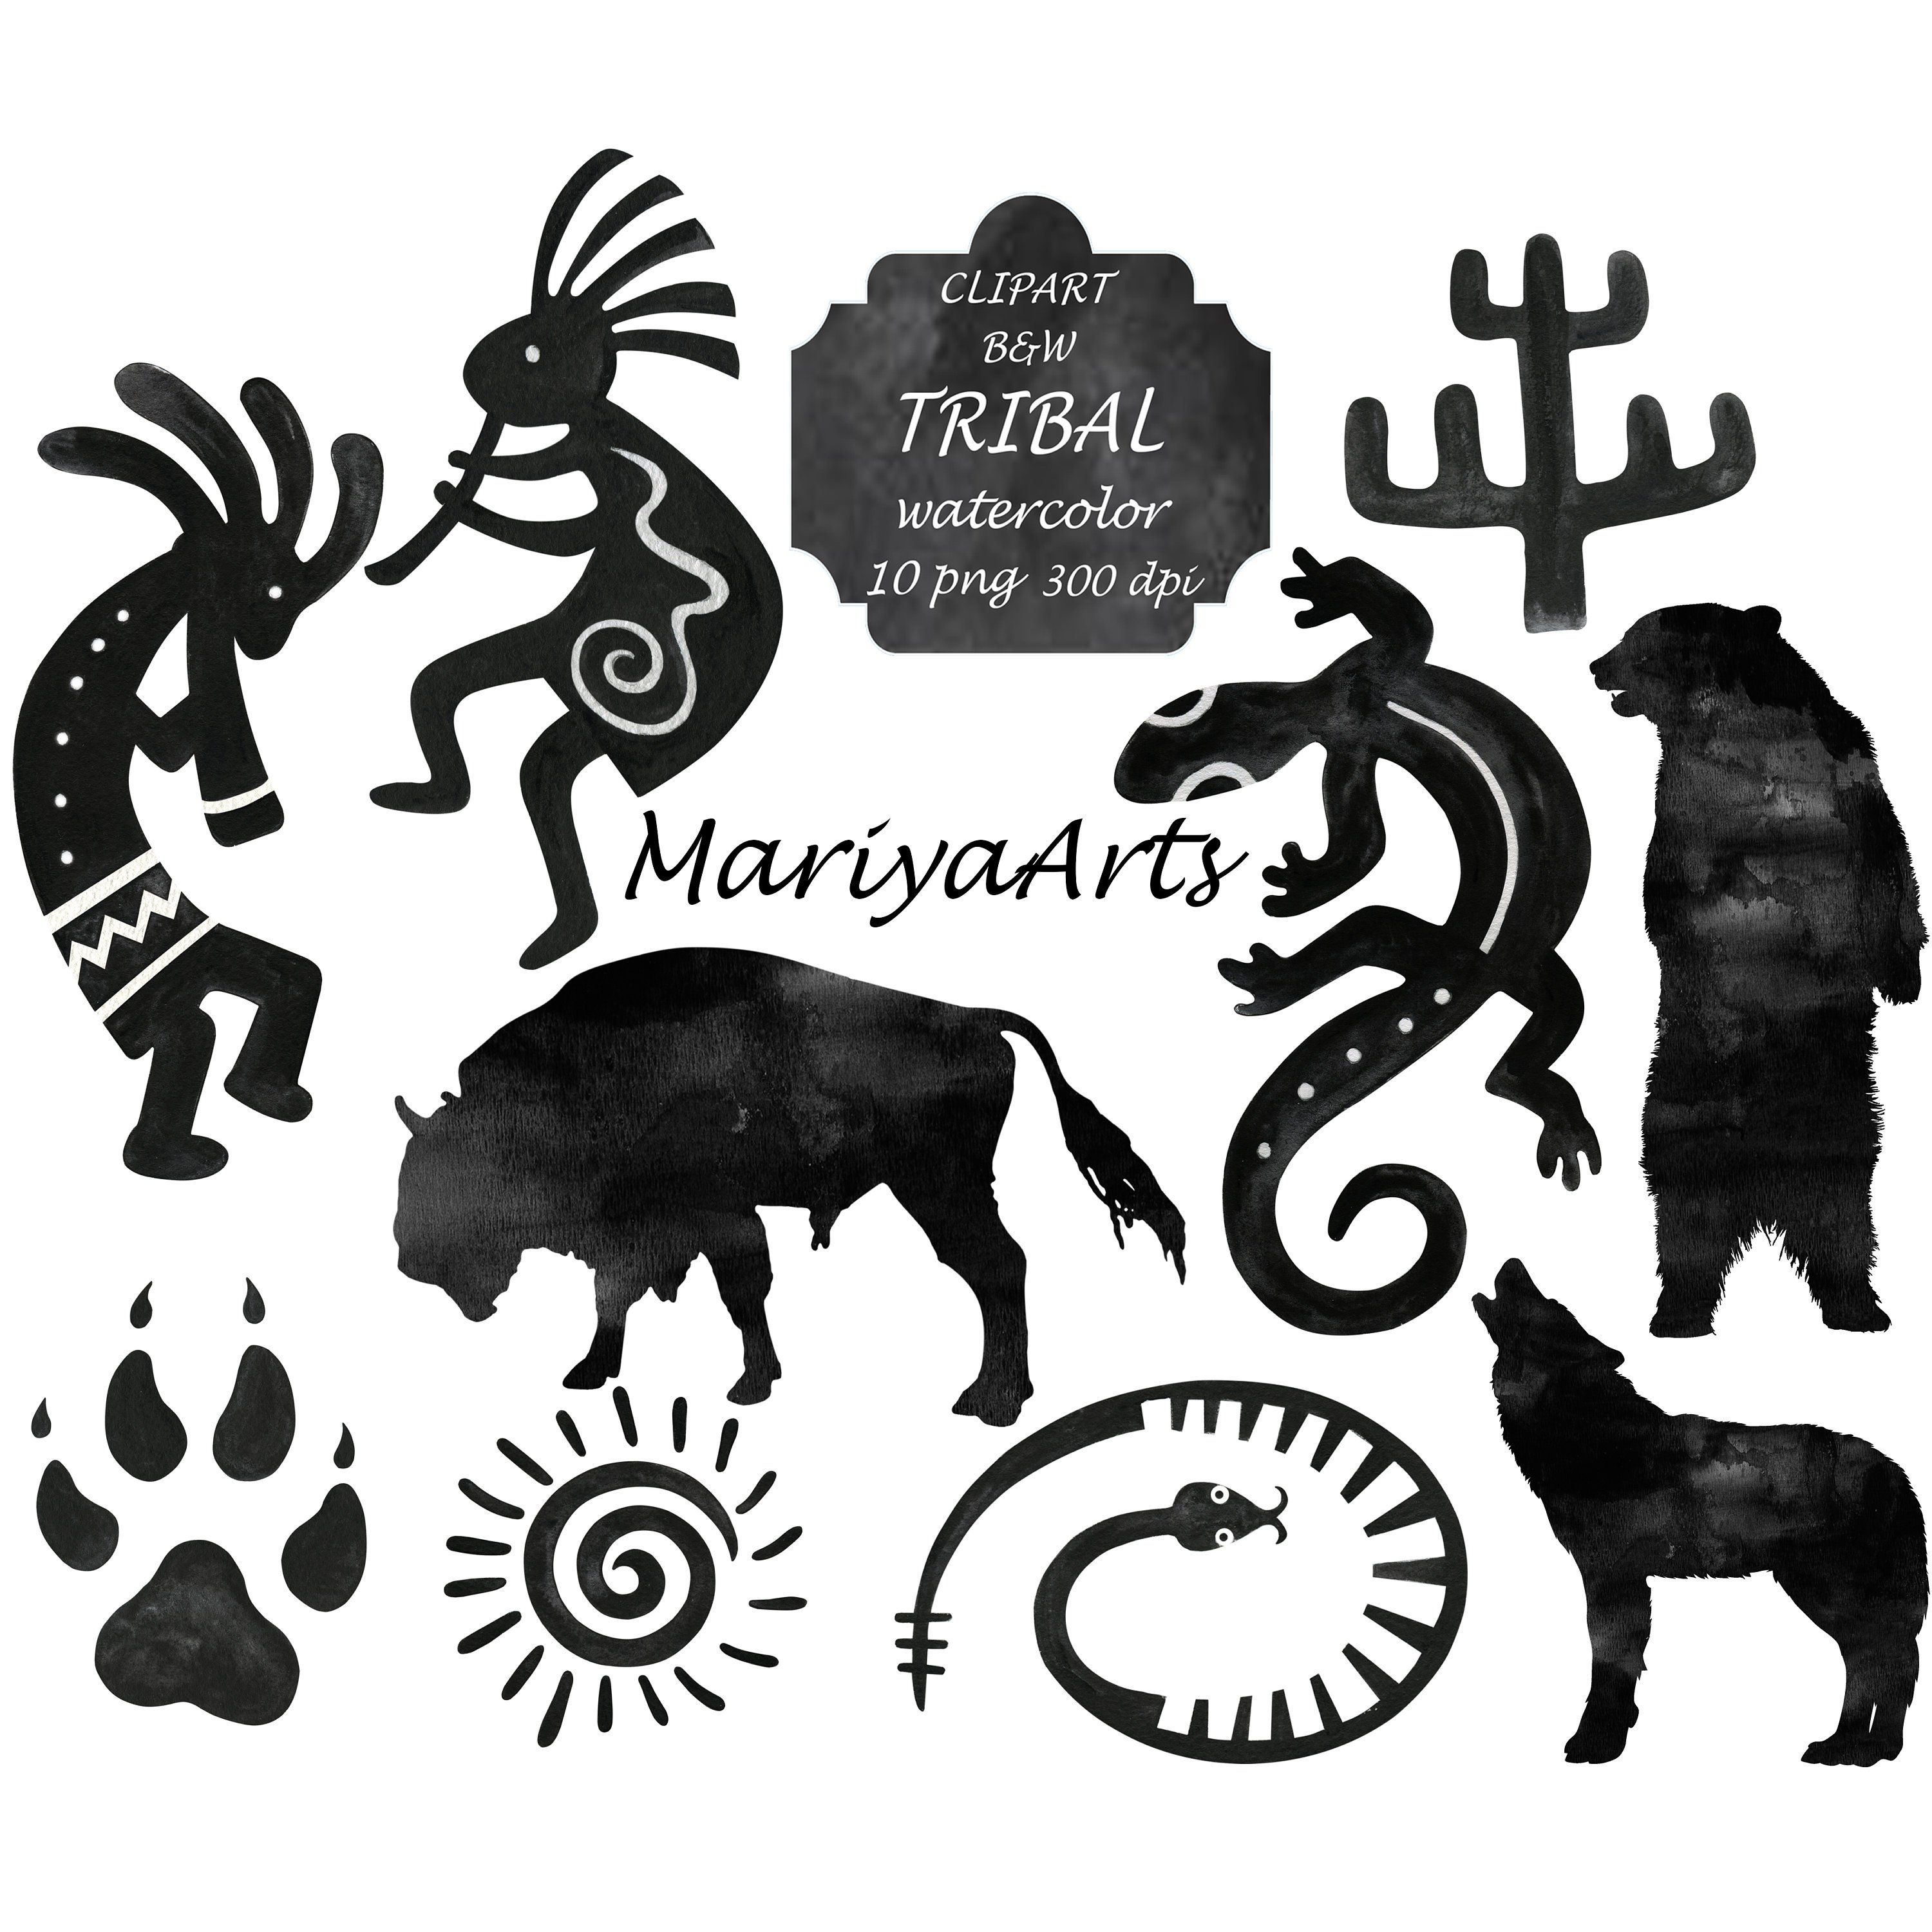 Indian clipart tribal. Native americans ethnic symbols